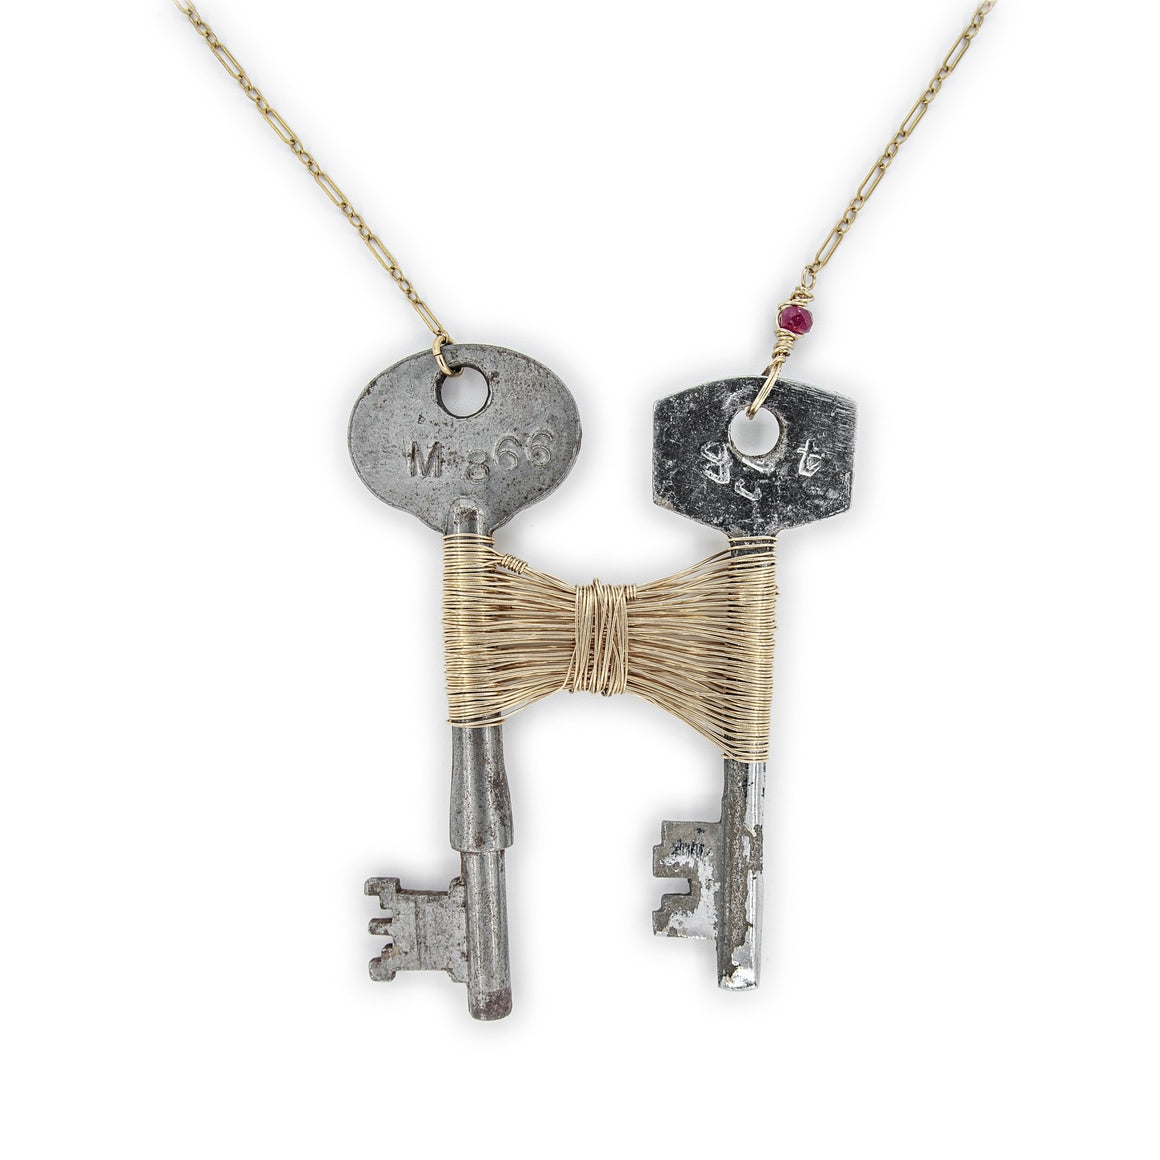 Skeleton Key and Gold Woven Necklace by Original Sin Jewelry